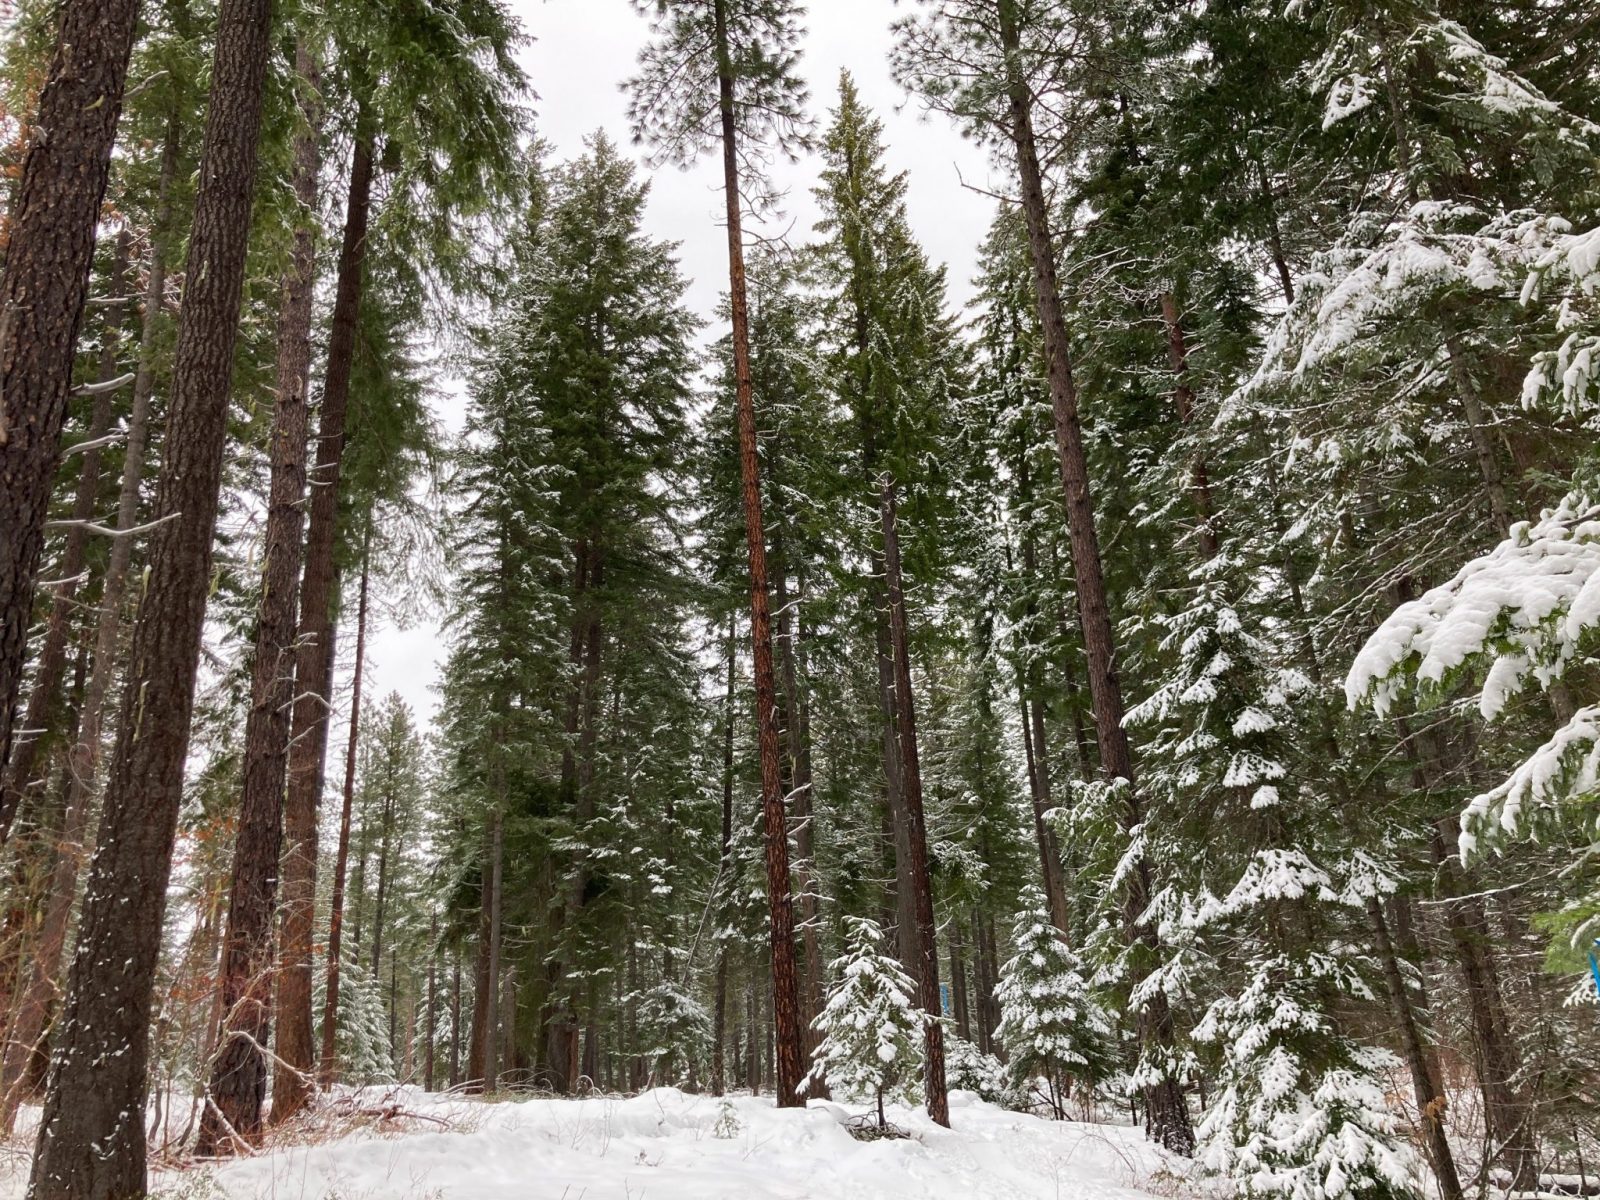 A snowy forest of tall pine trees